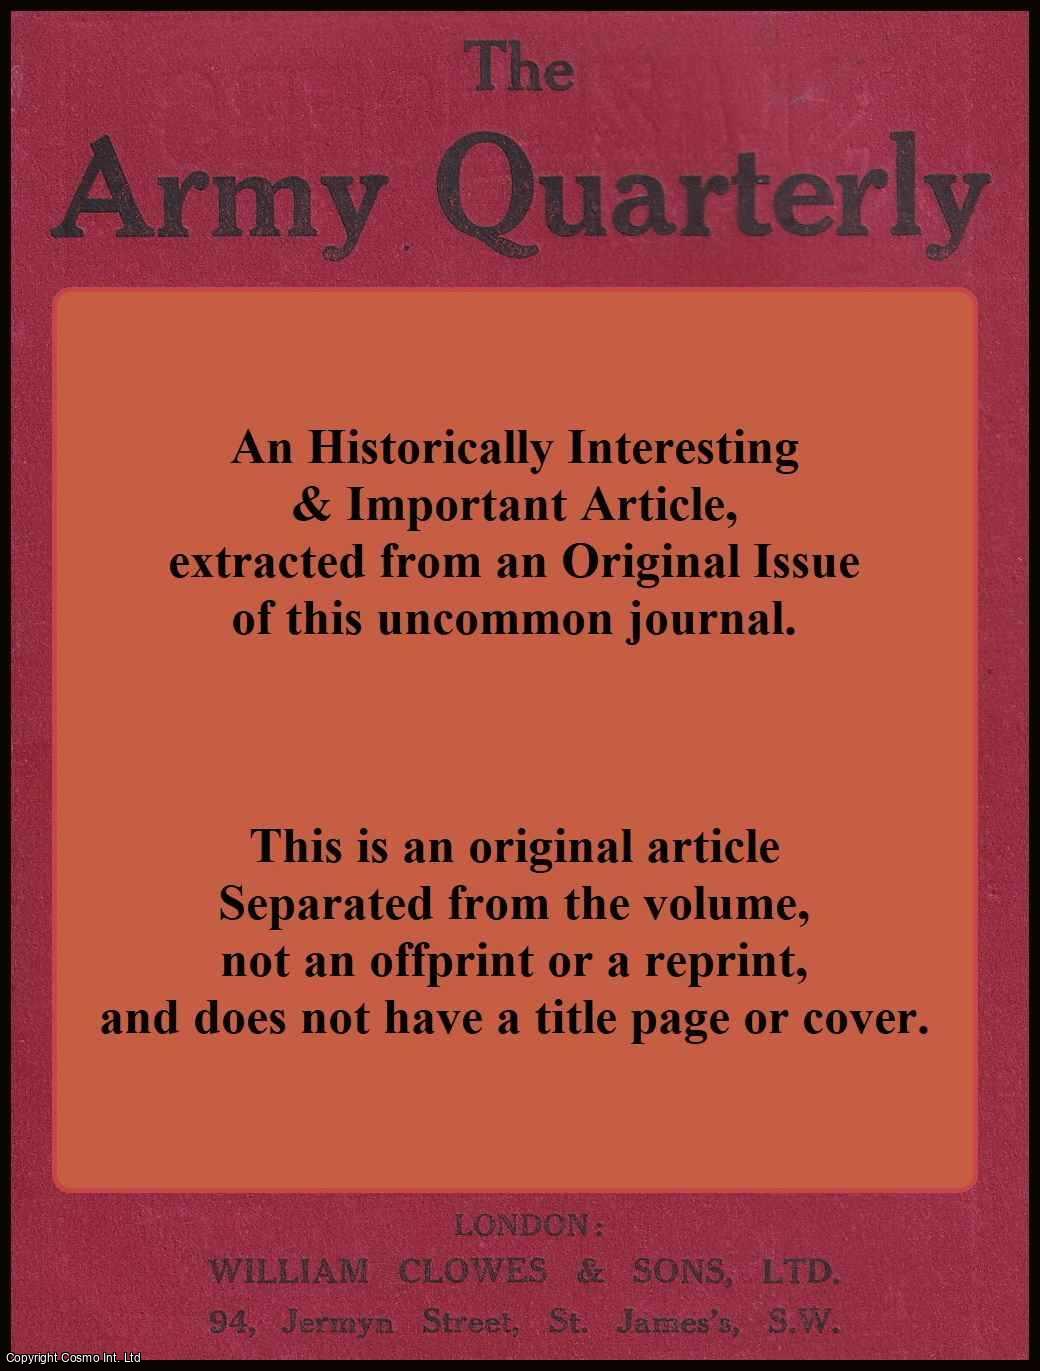 Translated by Arthur John Butler - The Memoirs, Part 4, of Baron de Marbot, Lieutentant-General of the French Army. An original article from the Army Quarterly, 1931.